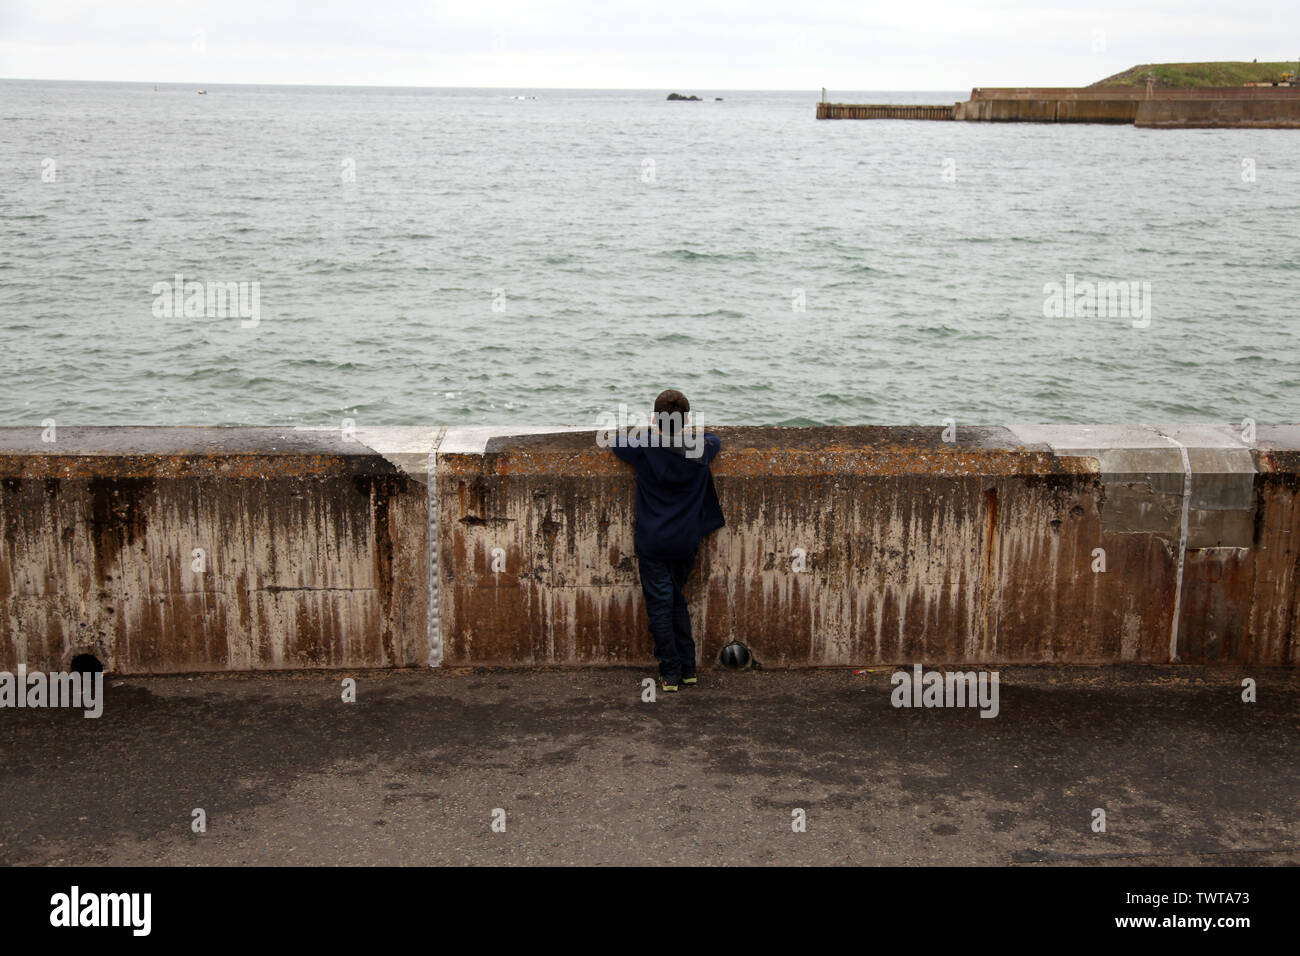 Eyemouth, Scotland, UK - Young boy looking out to sea at the scene of The Eyemouth Fishing Disaster of 1881 or ‘Black Friday’ Stock Photo